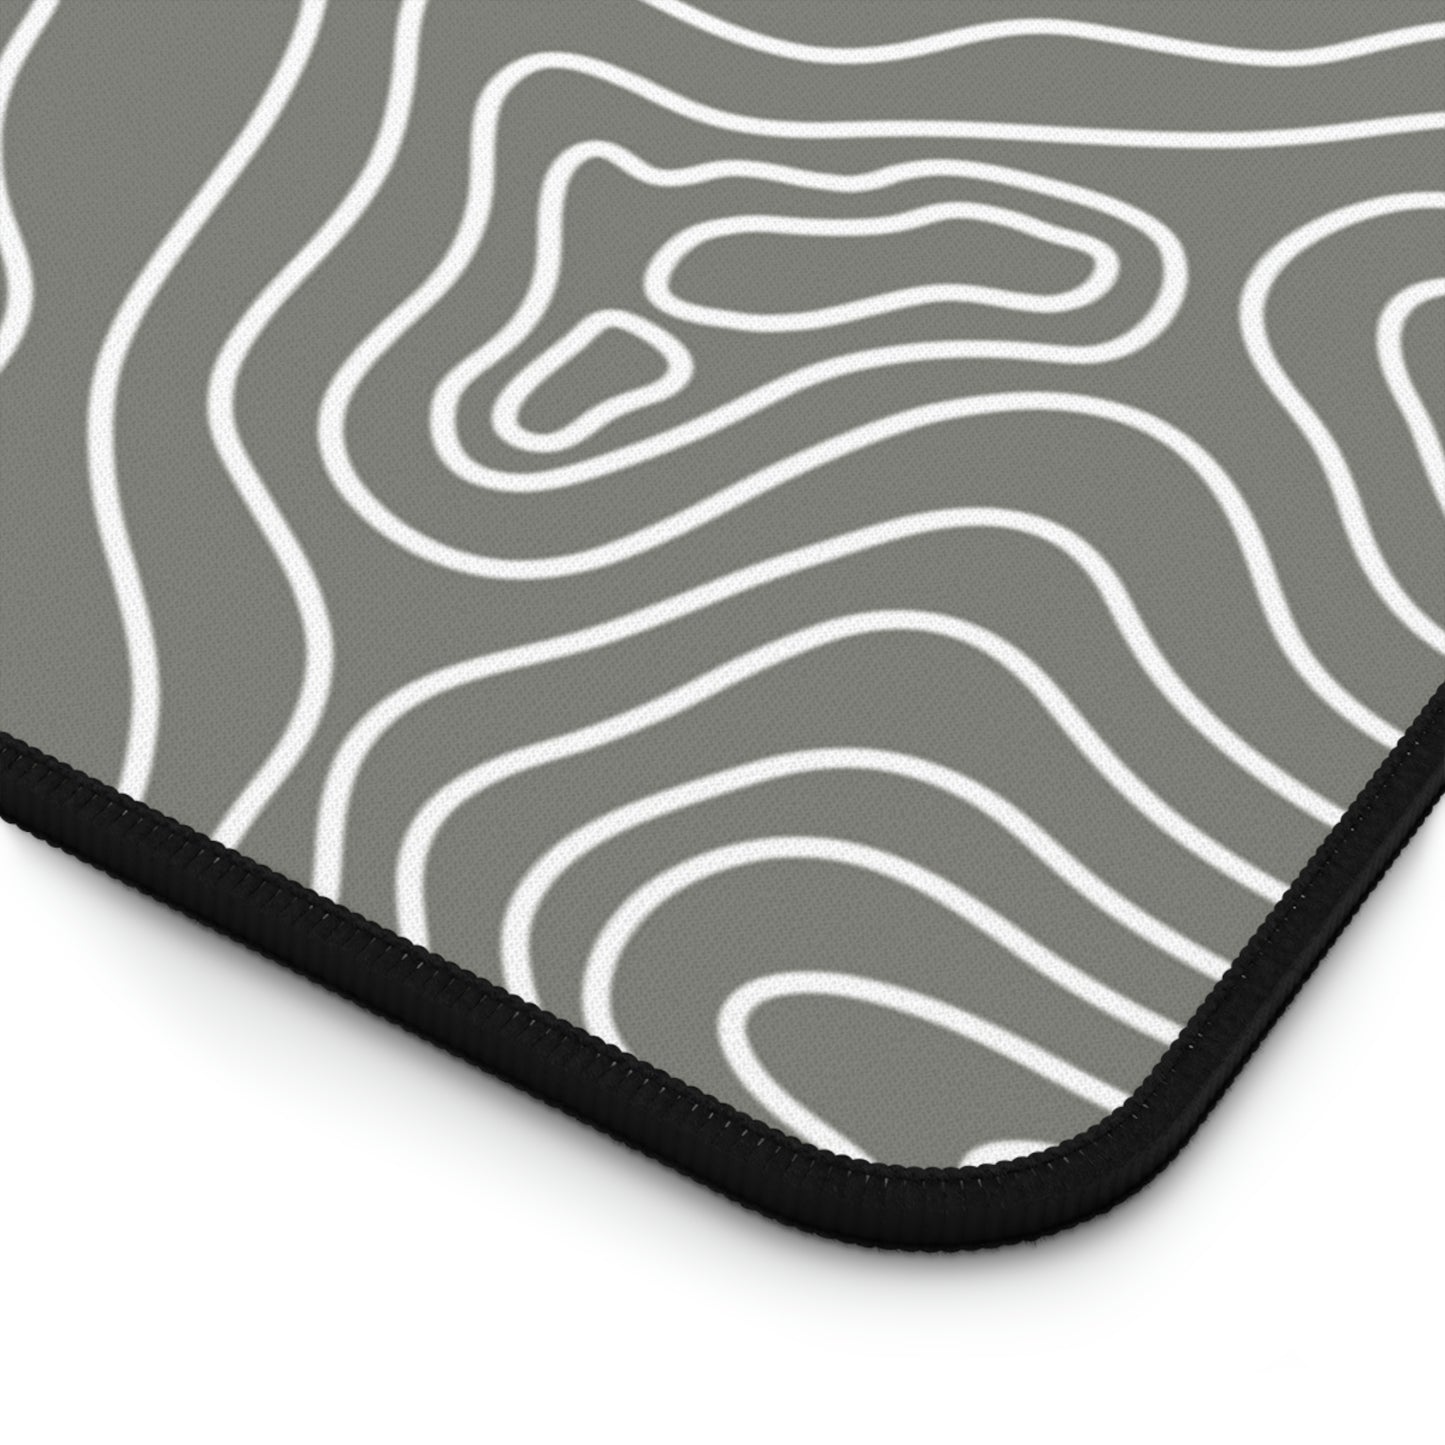 The bottom right corner of a 31" x 15.5" gray desk mat with white topographic lines.